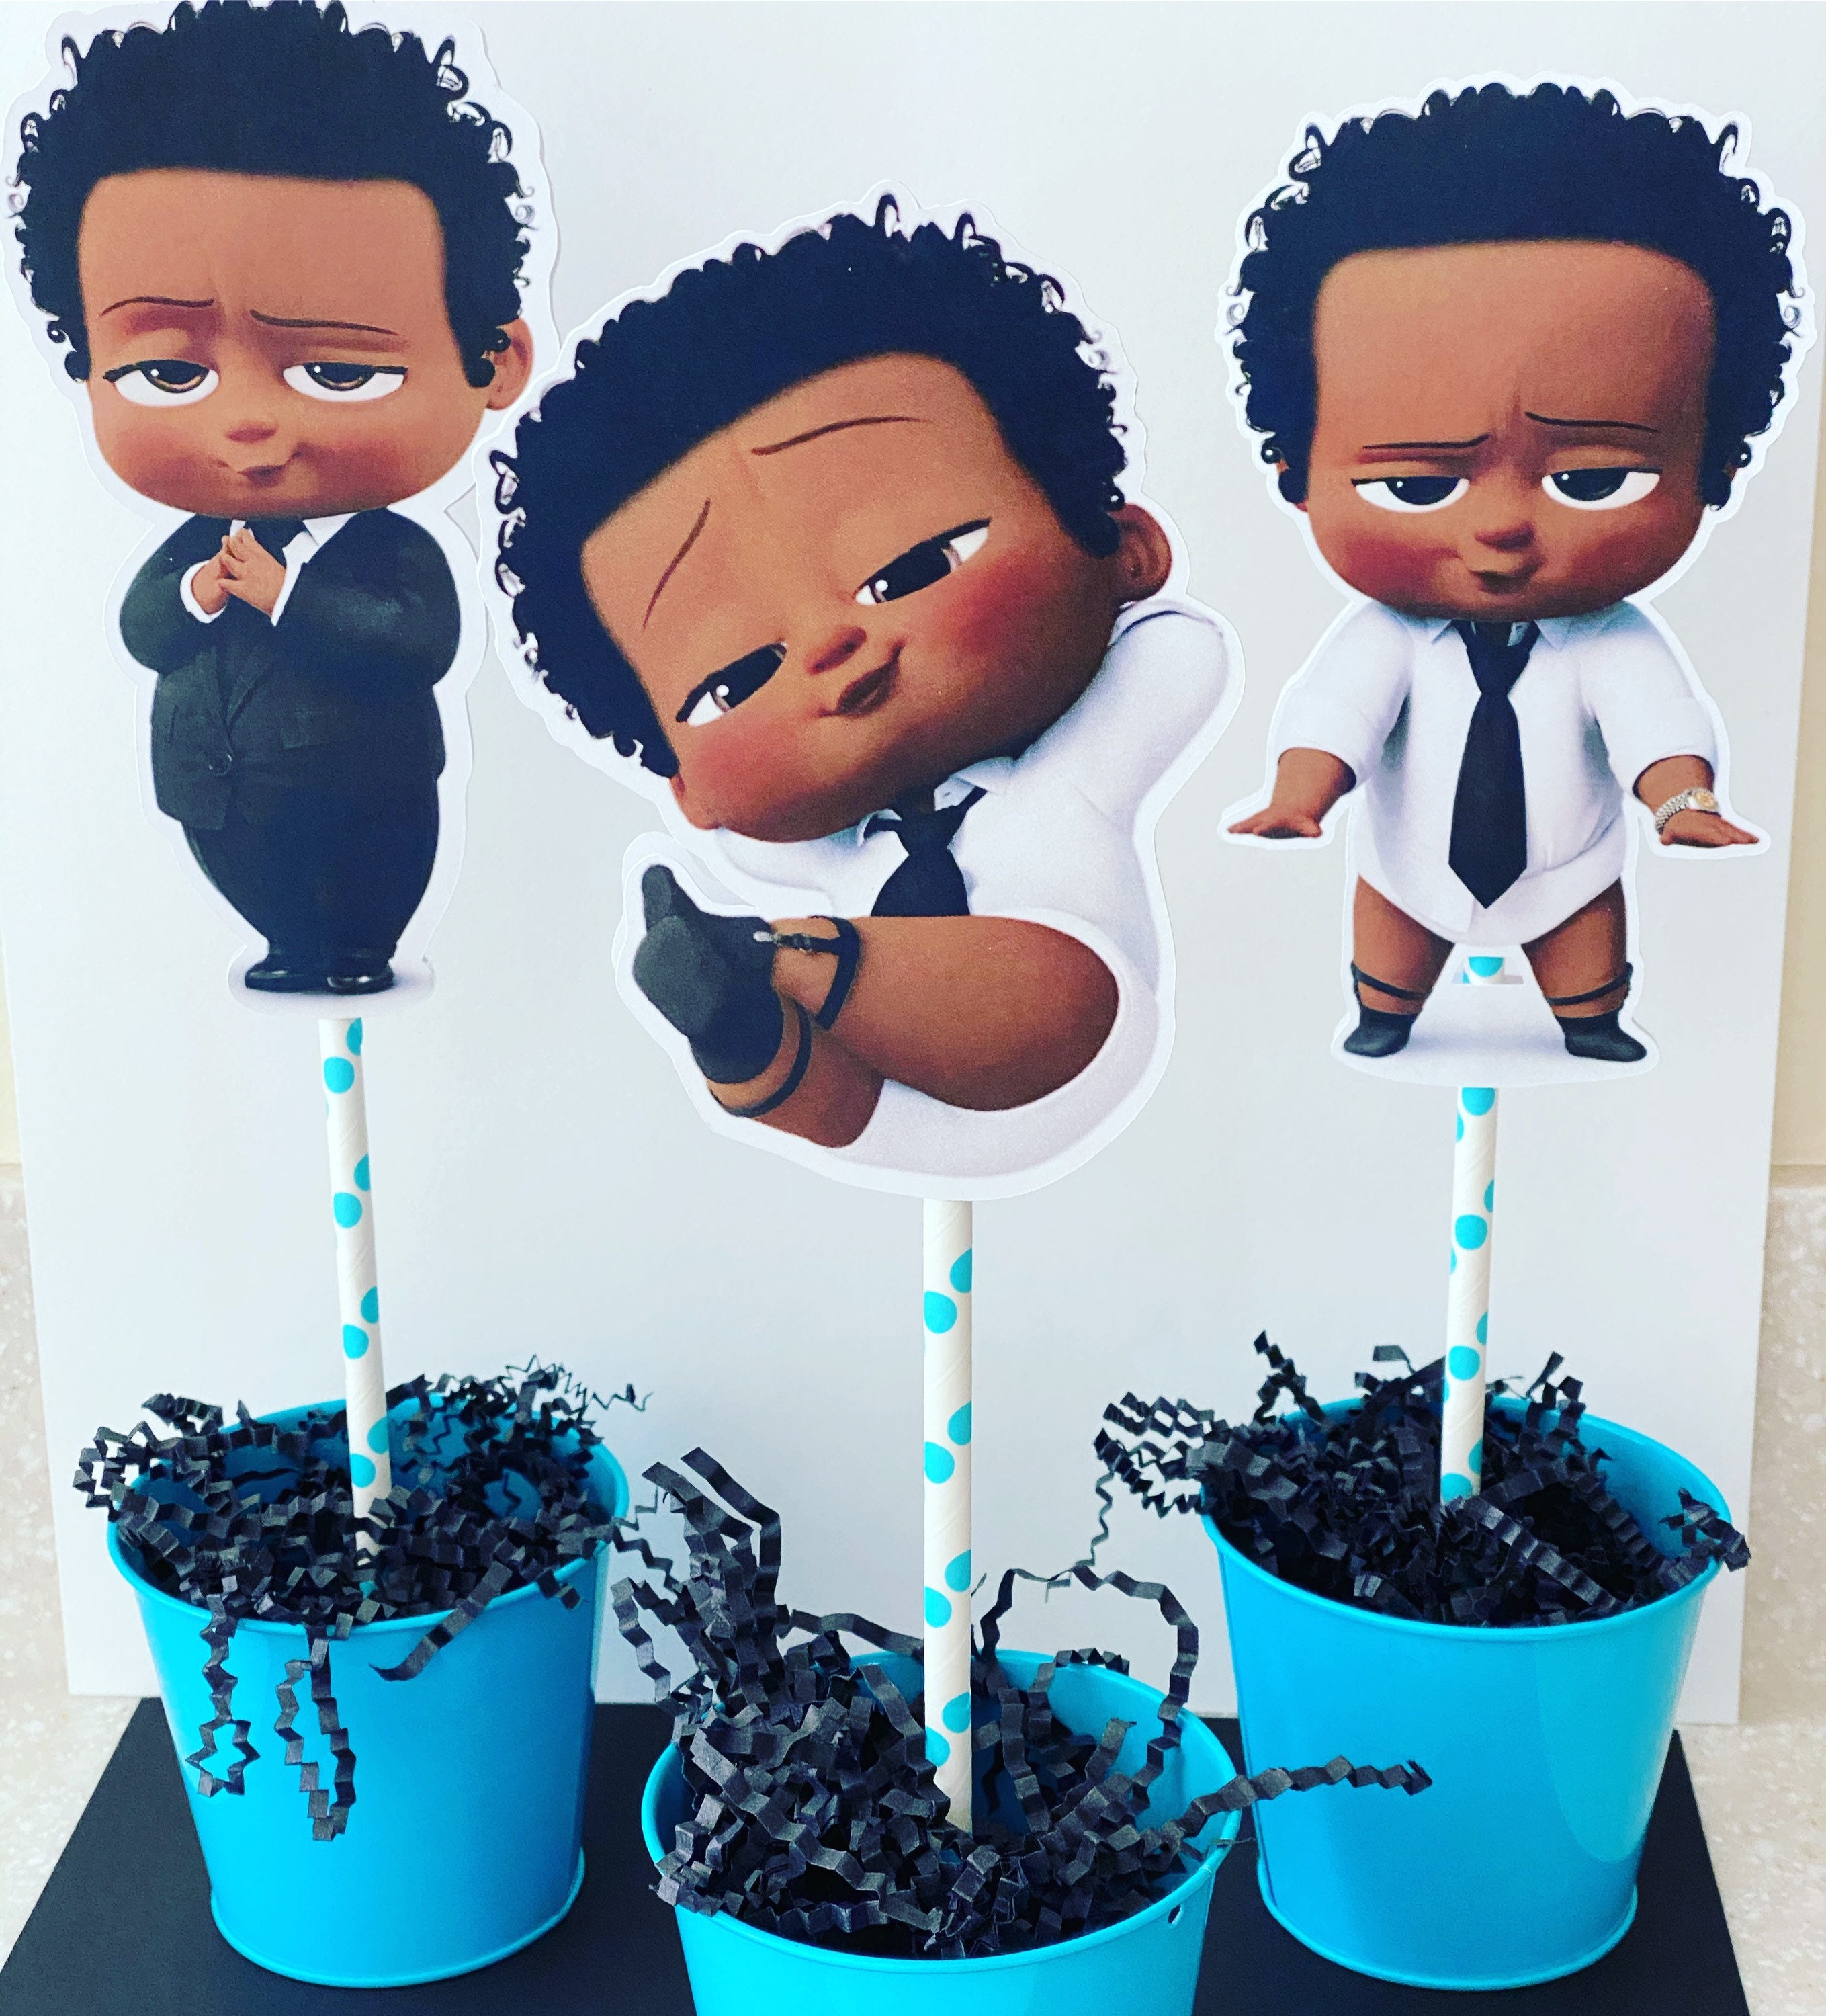 NutMeg Party Boxes - Ruthless and Toothless! BABY BOSS Cupcake toppers 👶🏼  . . . . . . #babyboss #cupcaketoppers #customorder #customdesign #party  #cake #nutmegpartyboxes #mompreneur